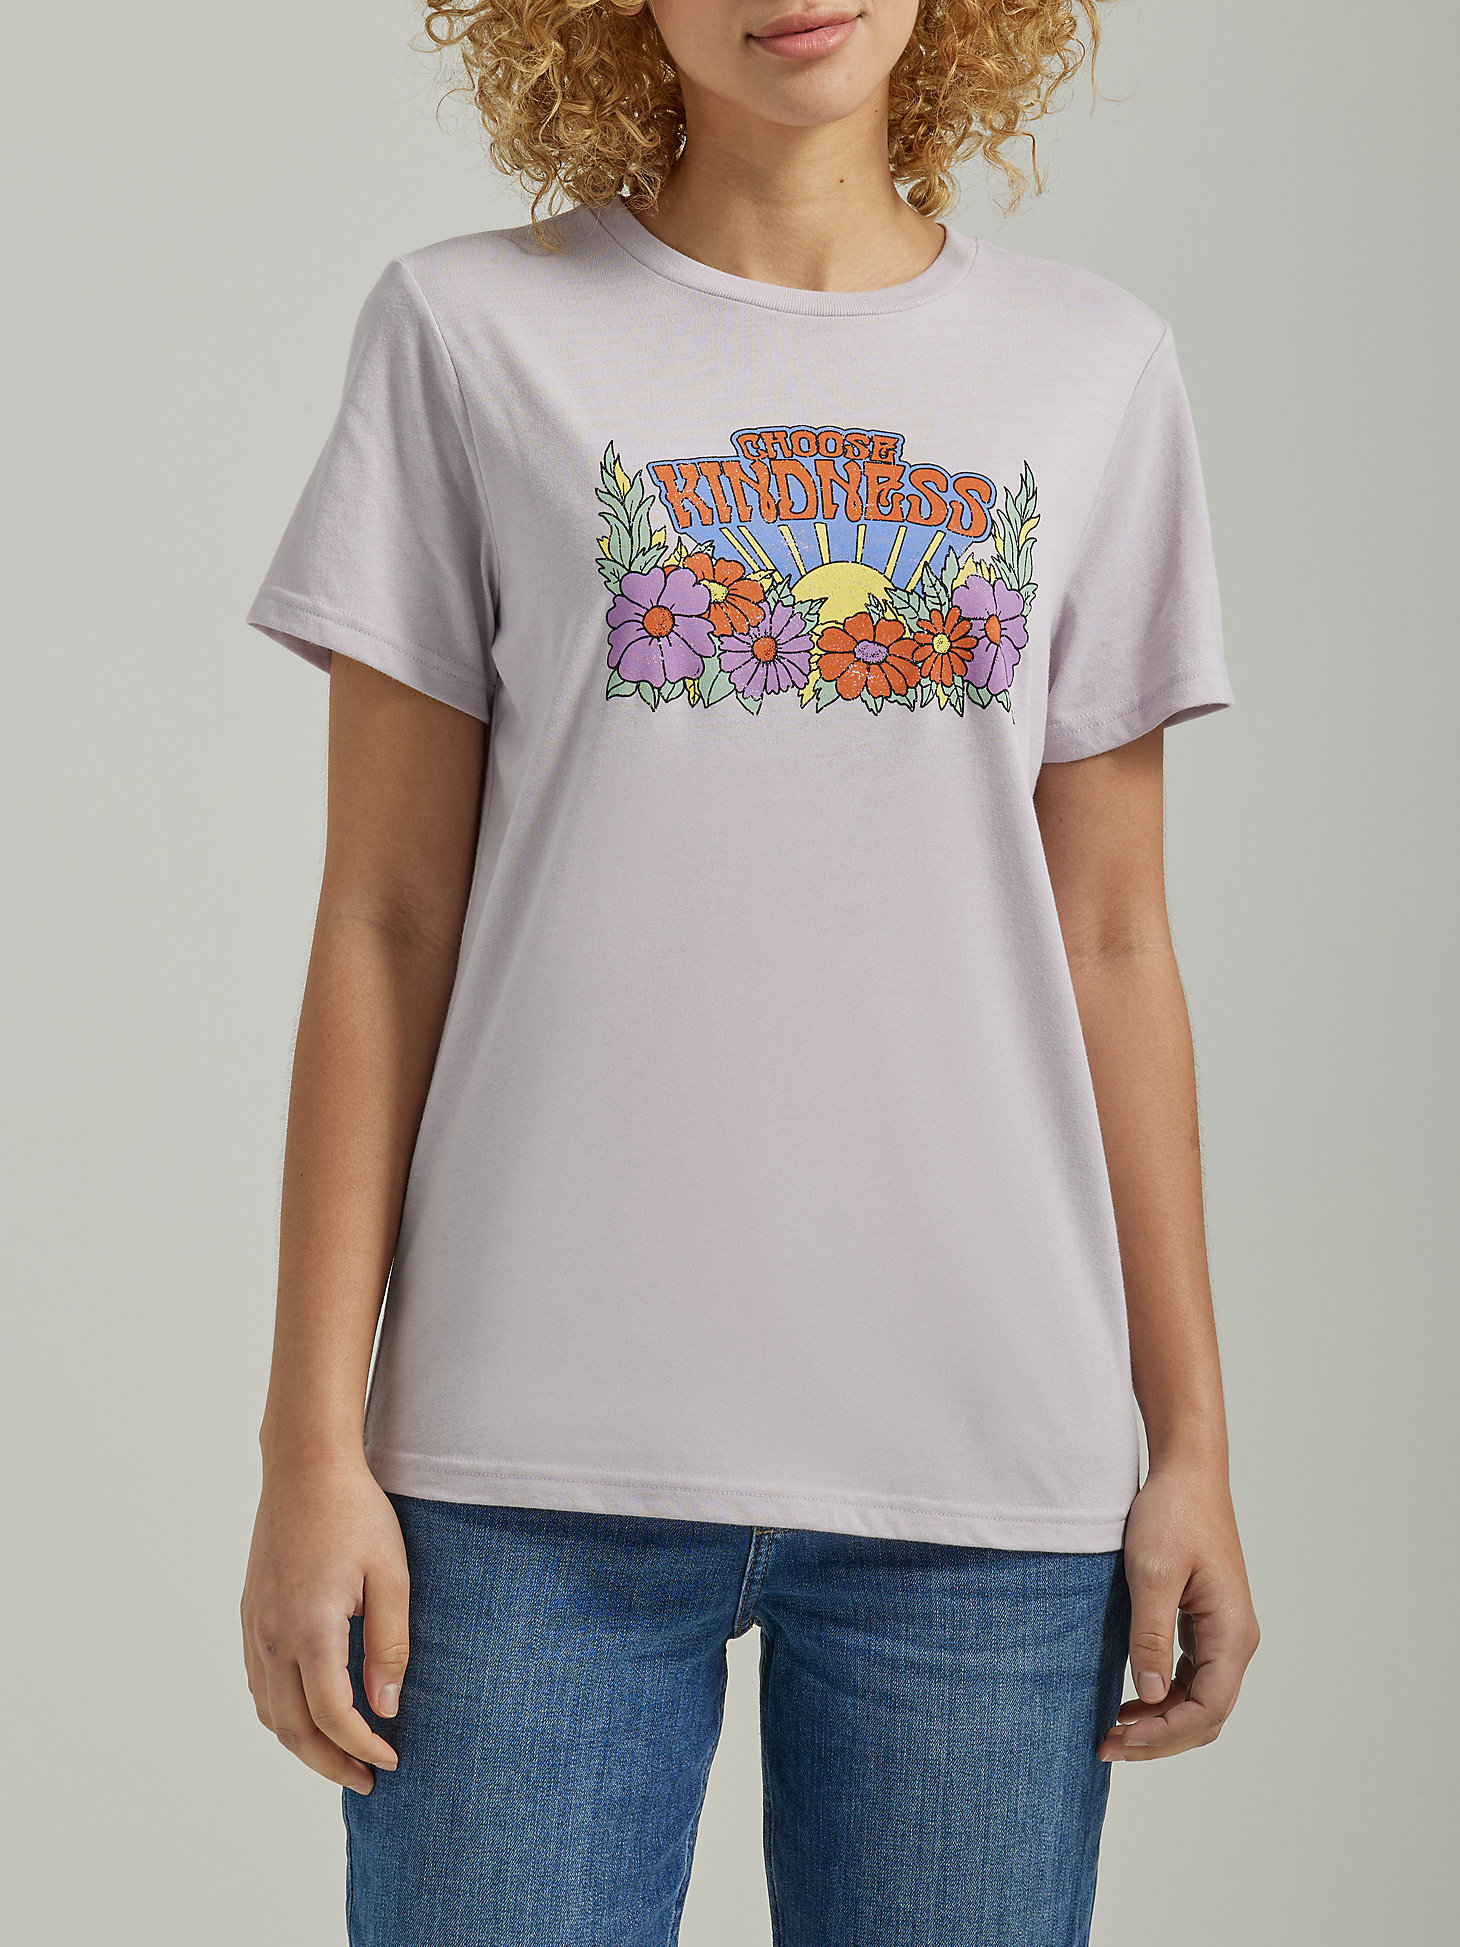 Women's Choose Kindness Graphic Tee in Misty Lilac main view